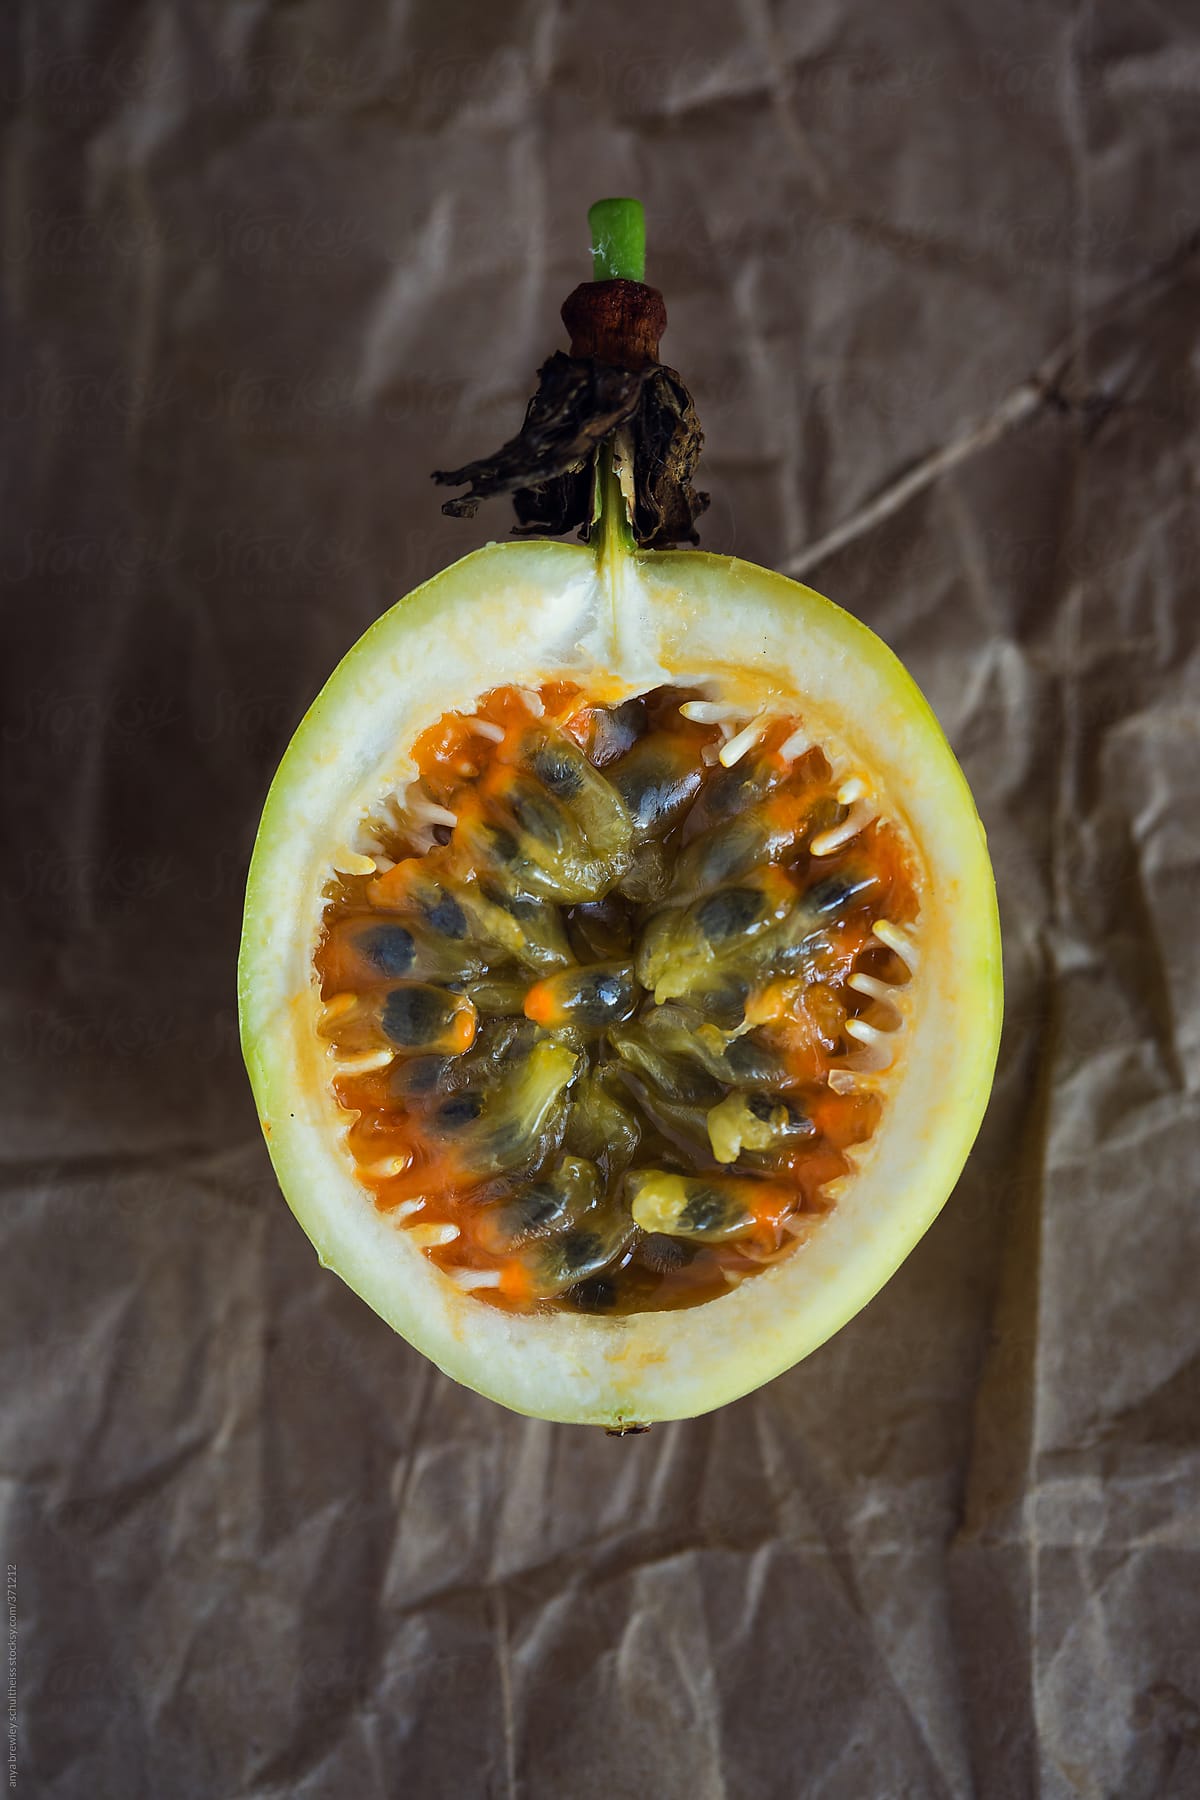 Cut passion fruit showing the inside seeds and pulp